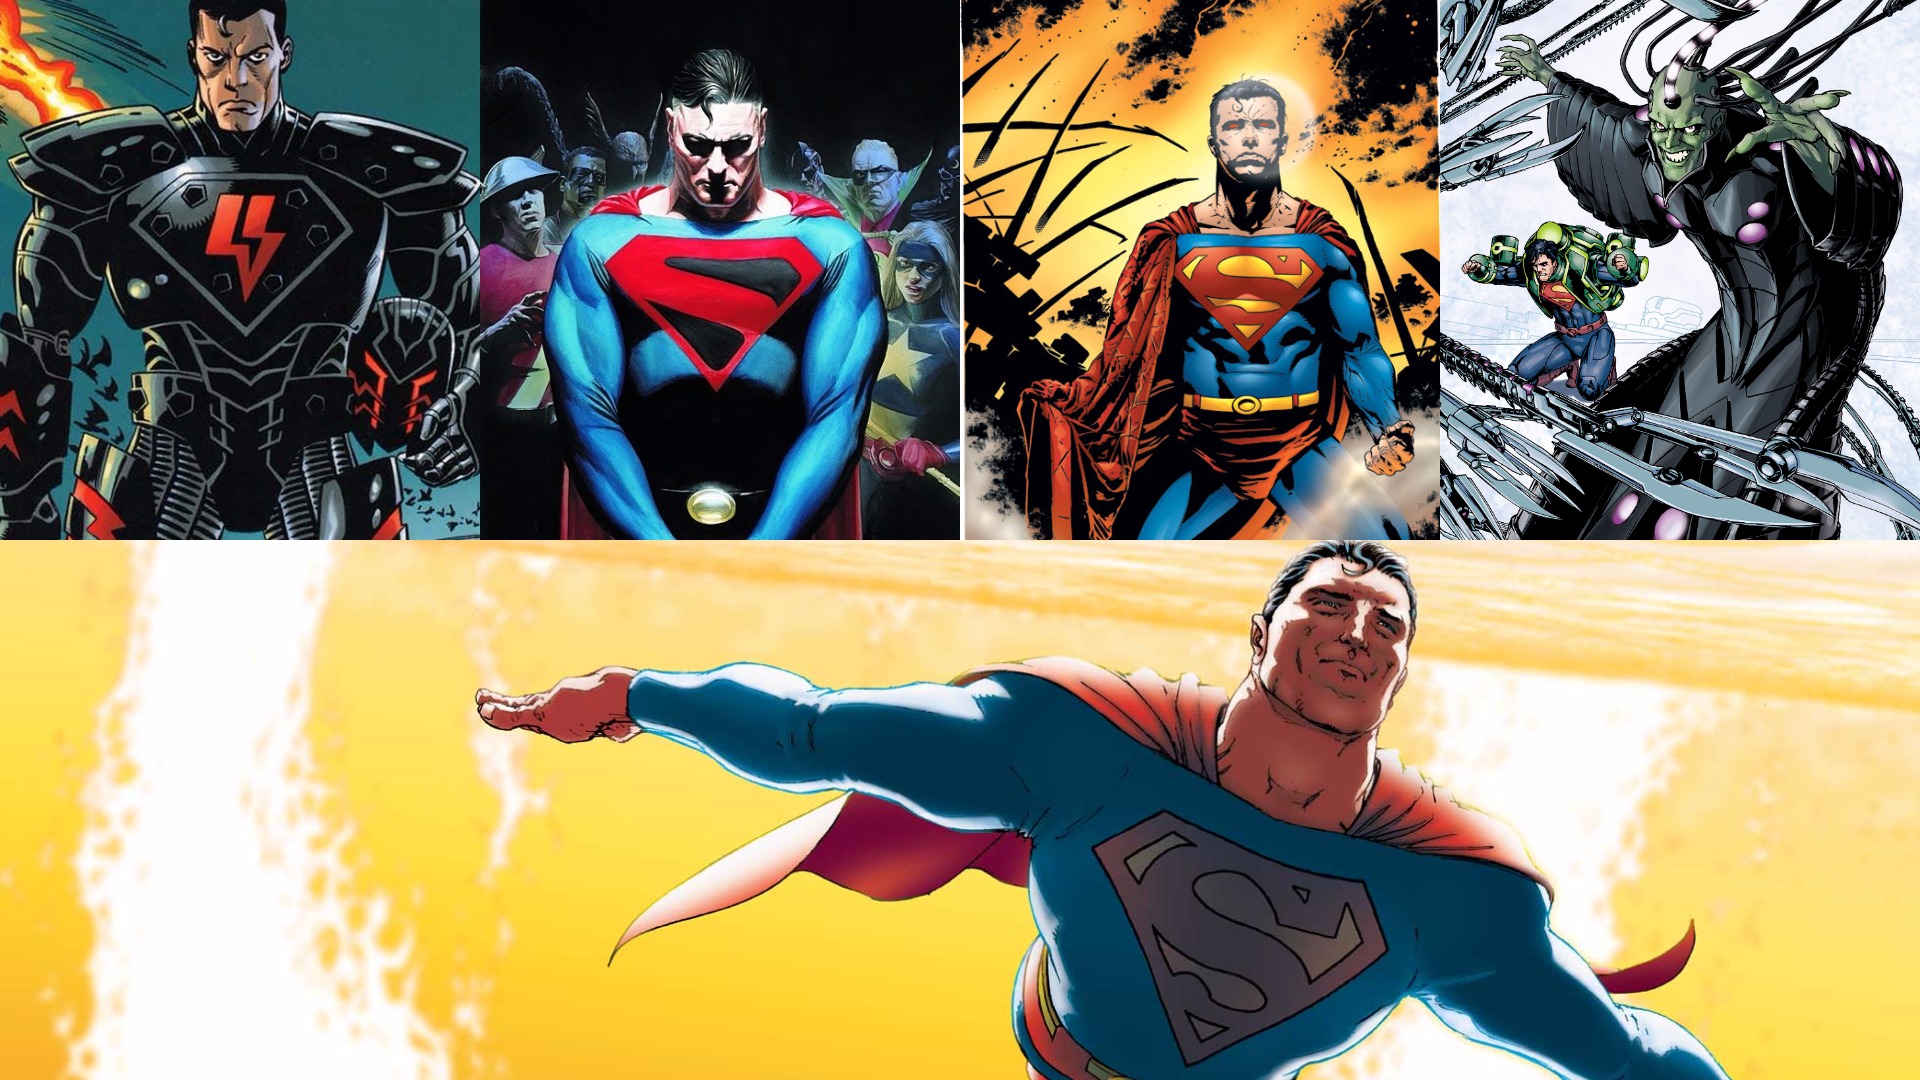 Superman storylines for Man of Steel 2